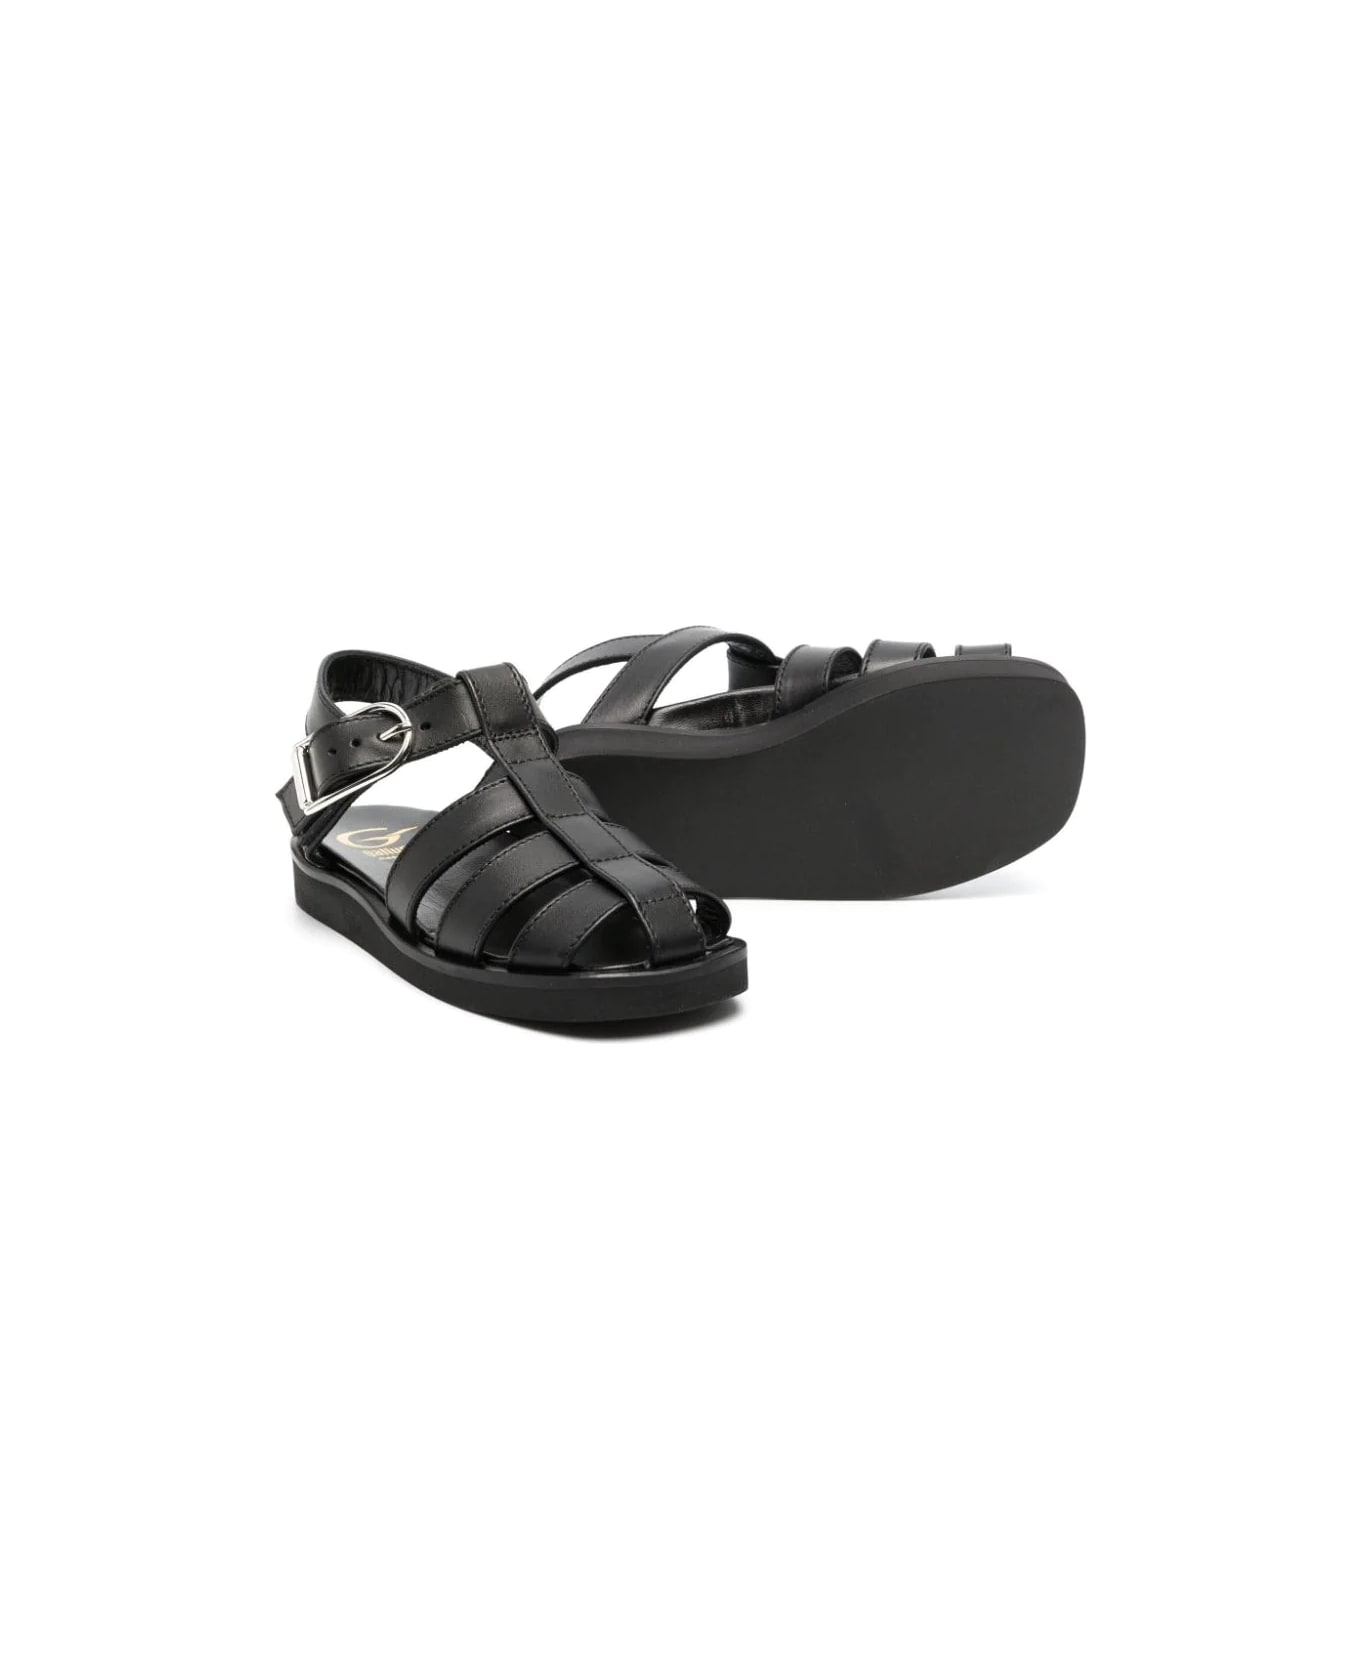 Gallucci Sandals With Buckle - Black